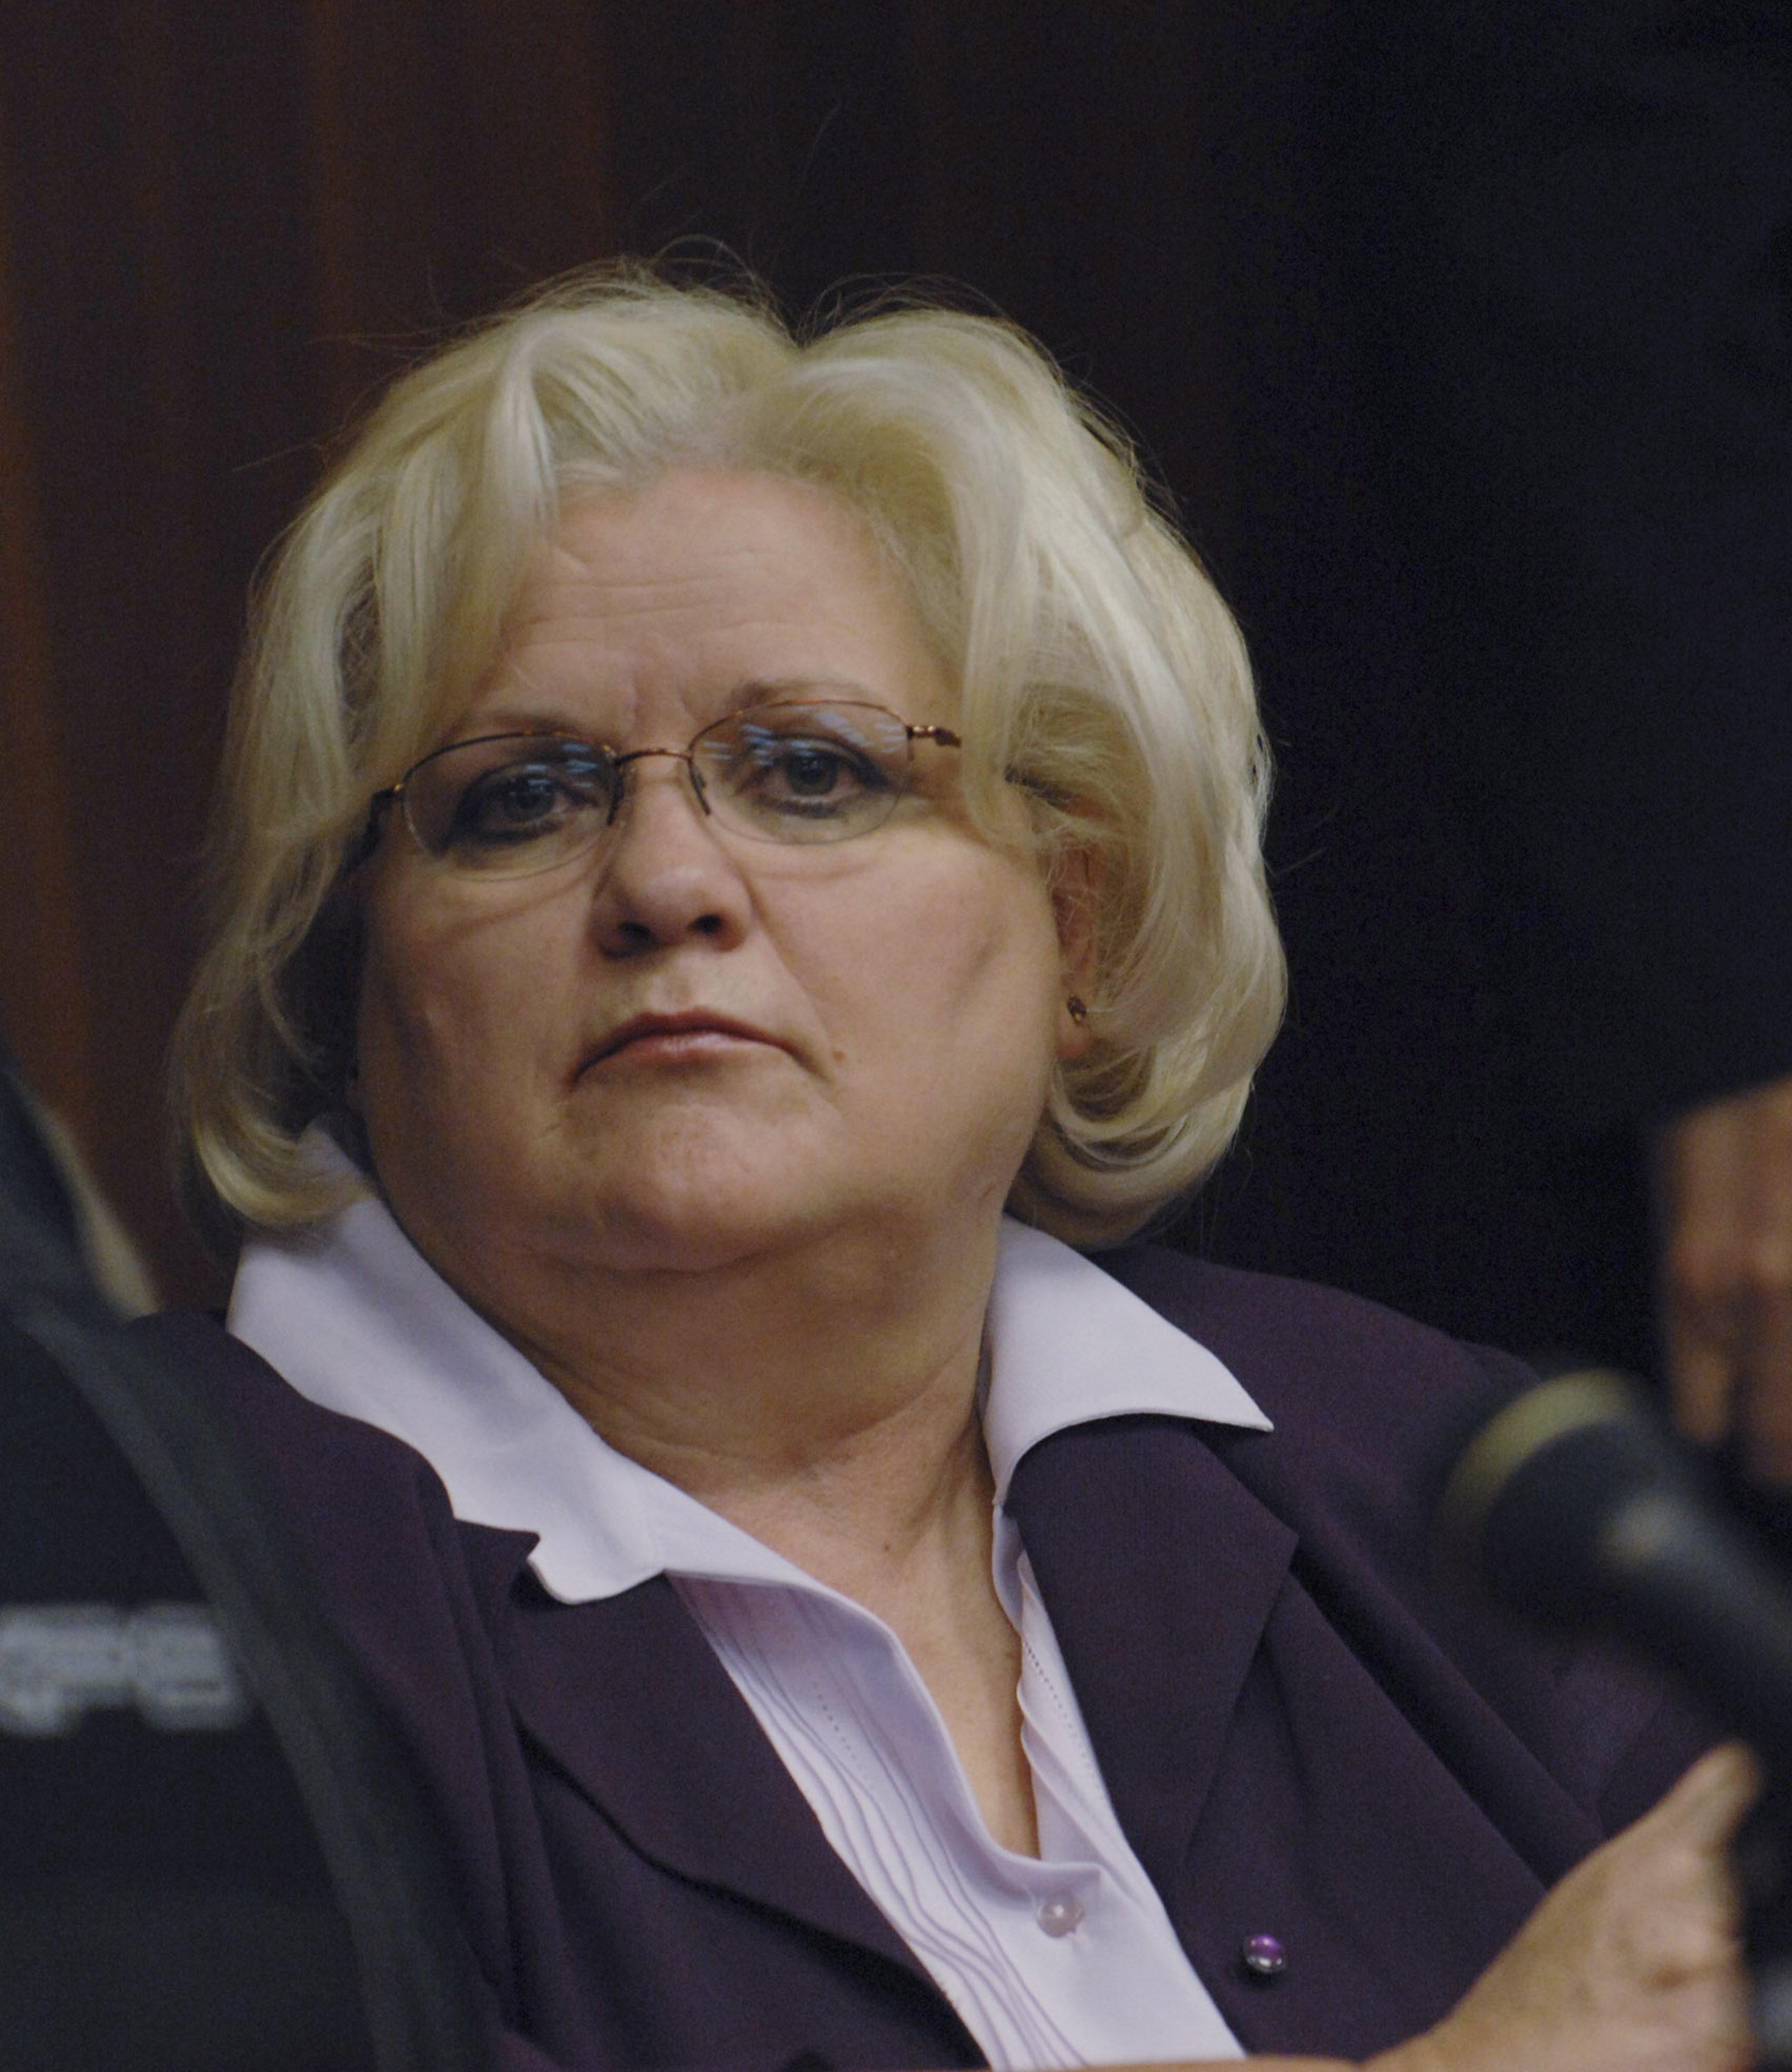 Anna Nicole Smith's mother Virgie Arthur listens during hearings that will determine who will hold custody of Smith's remains in a courtroom at Broward County Circuit Court February 20, 2007 | Photo: GettyImages